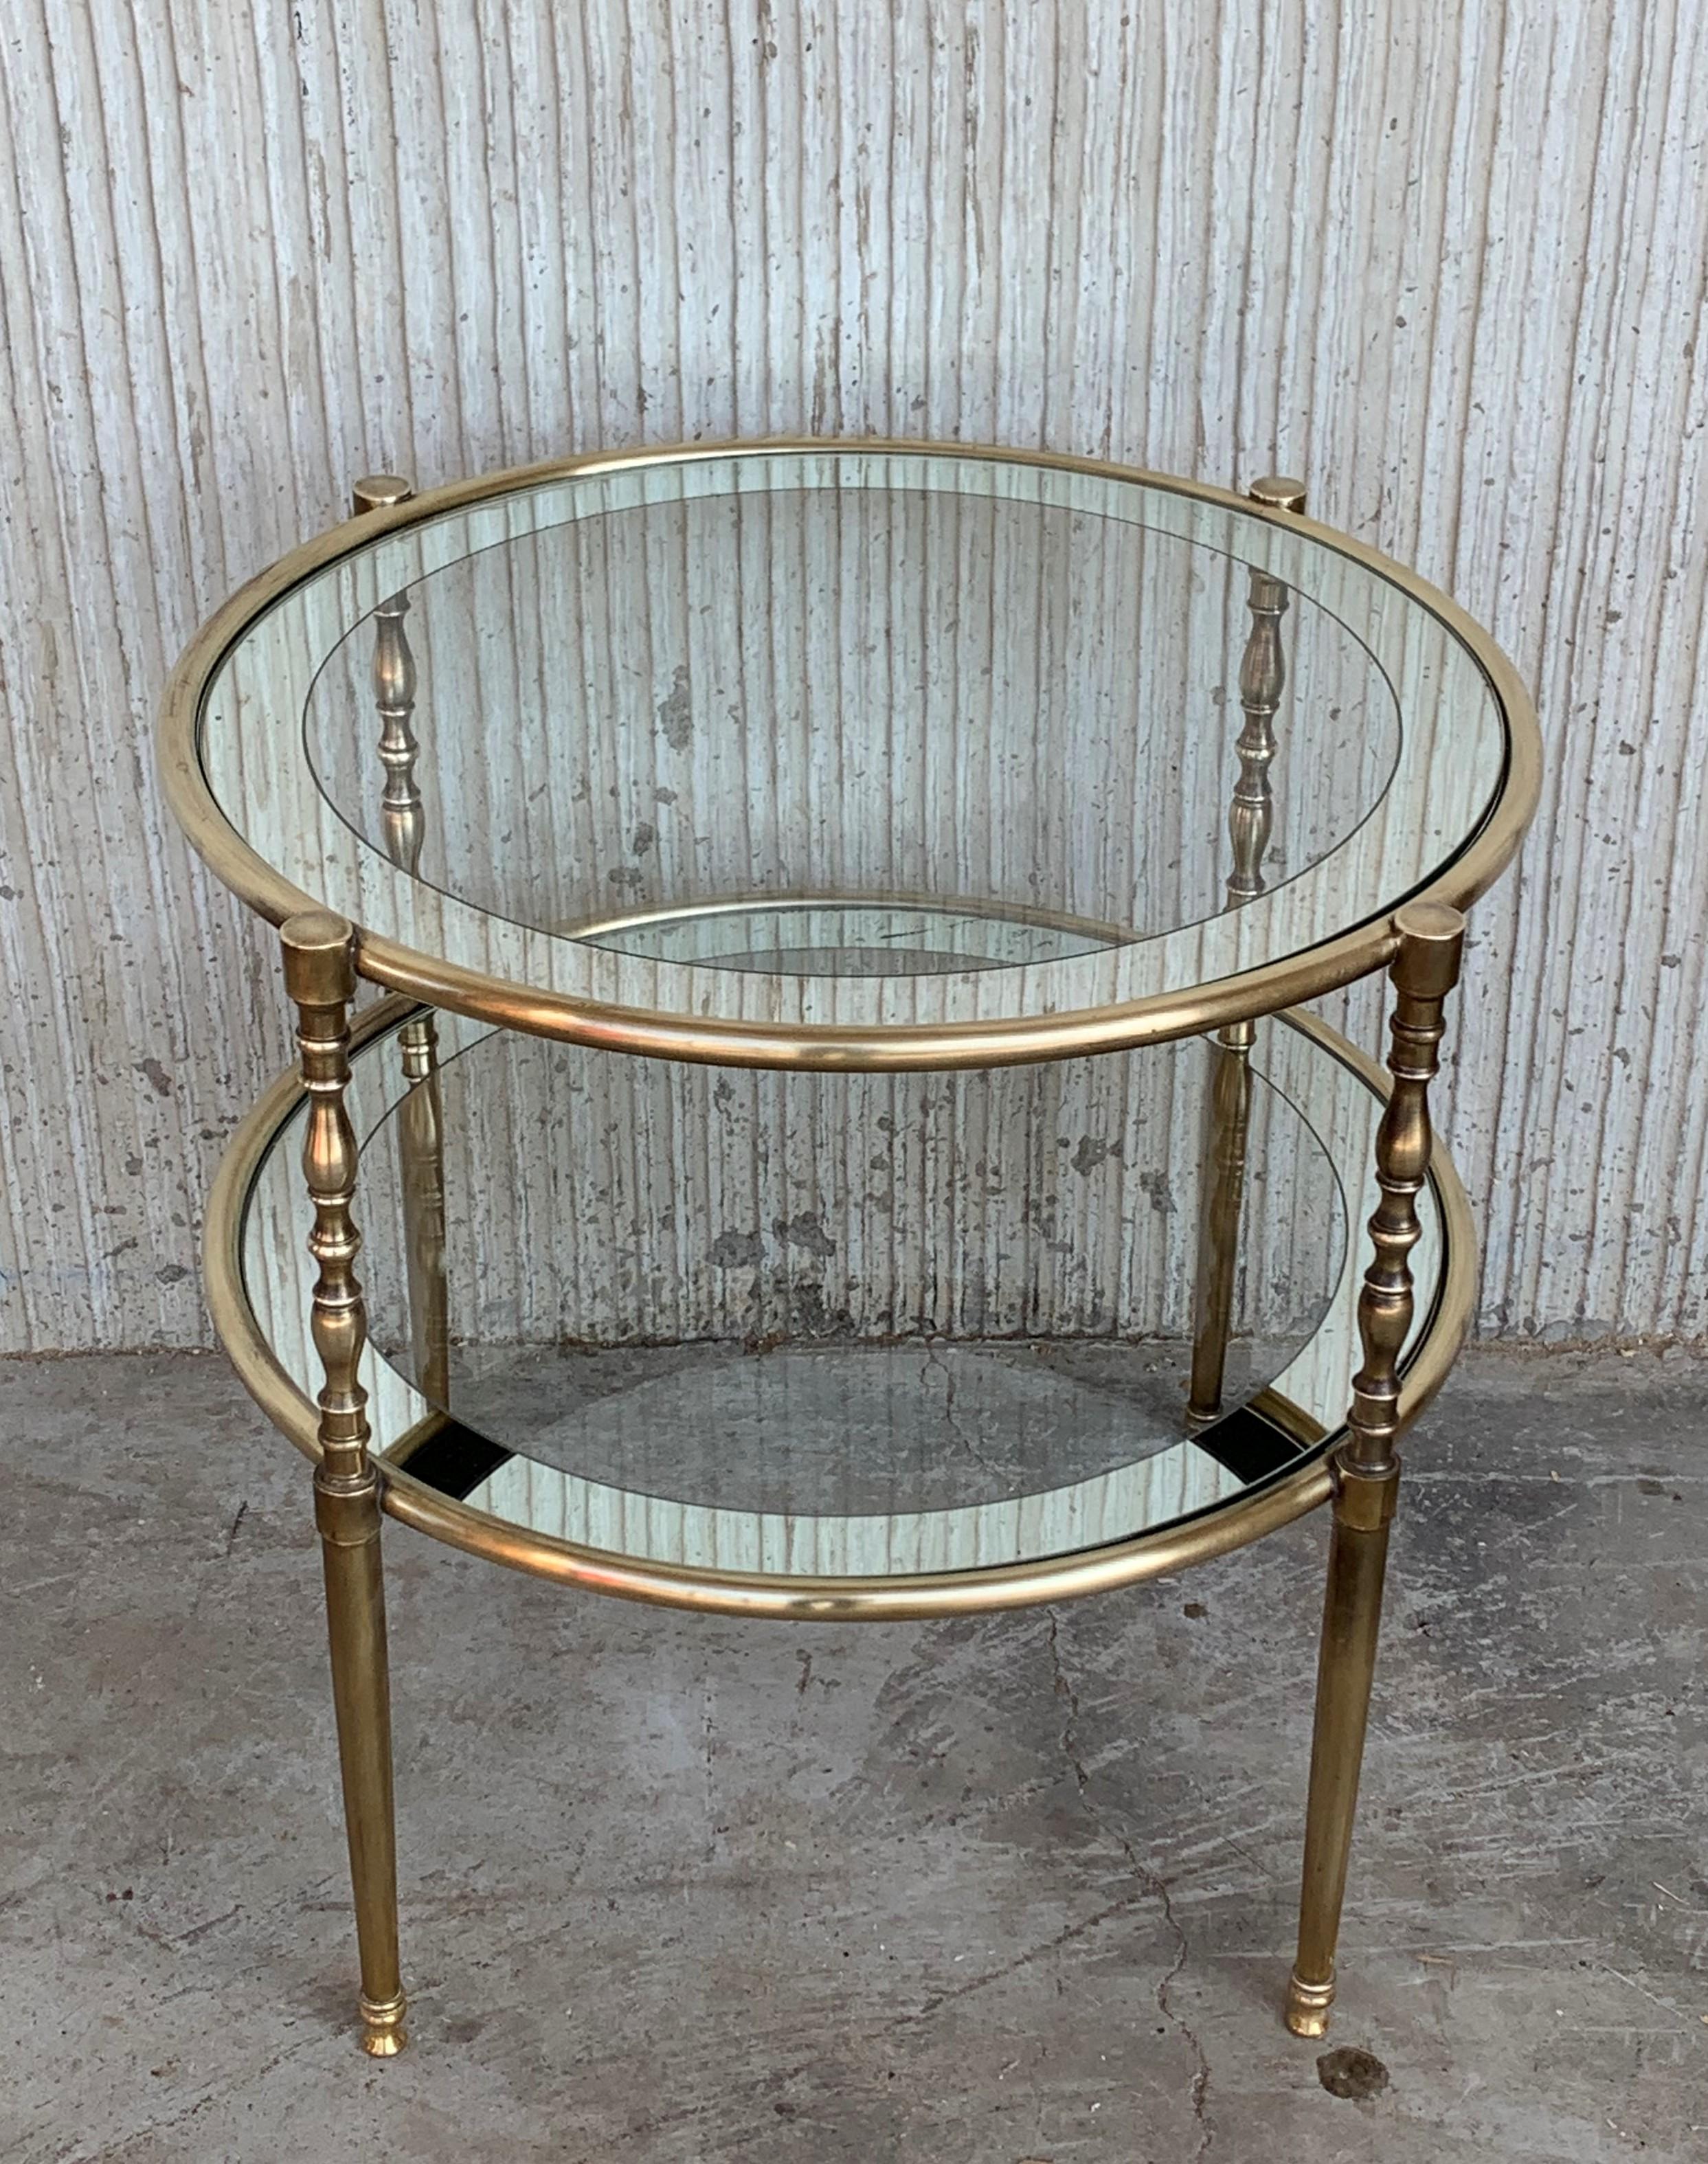 Mid-Century Modern two-tier brass and mirror beveled glass side table in Maison Jansen style with fluted brass legs and foot.